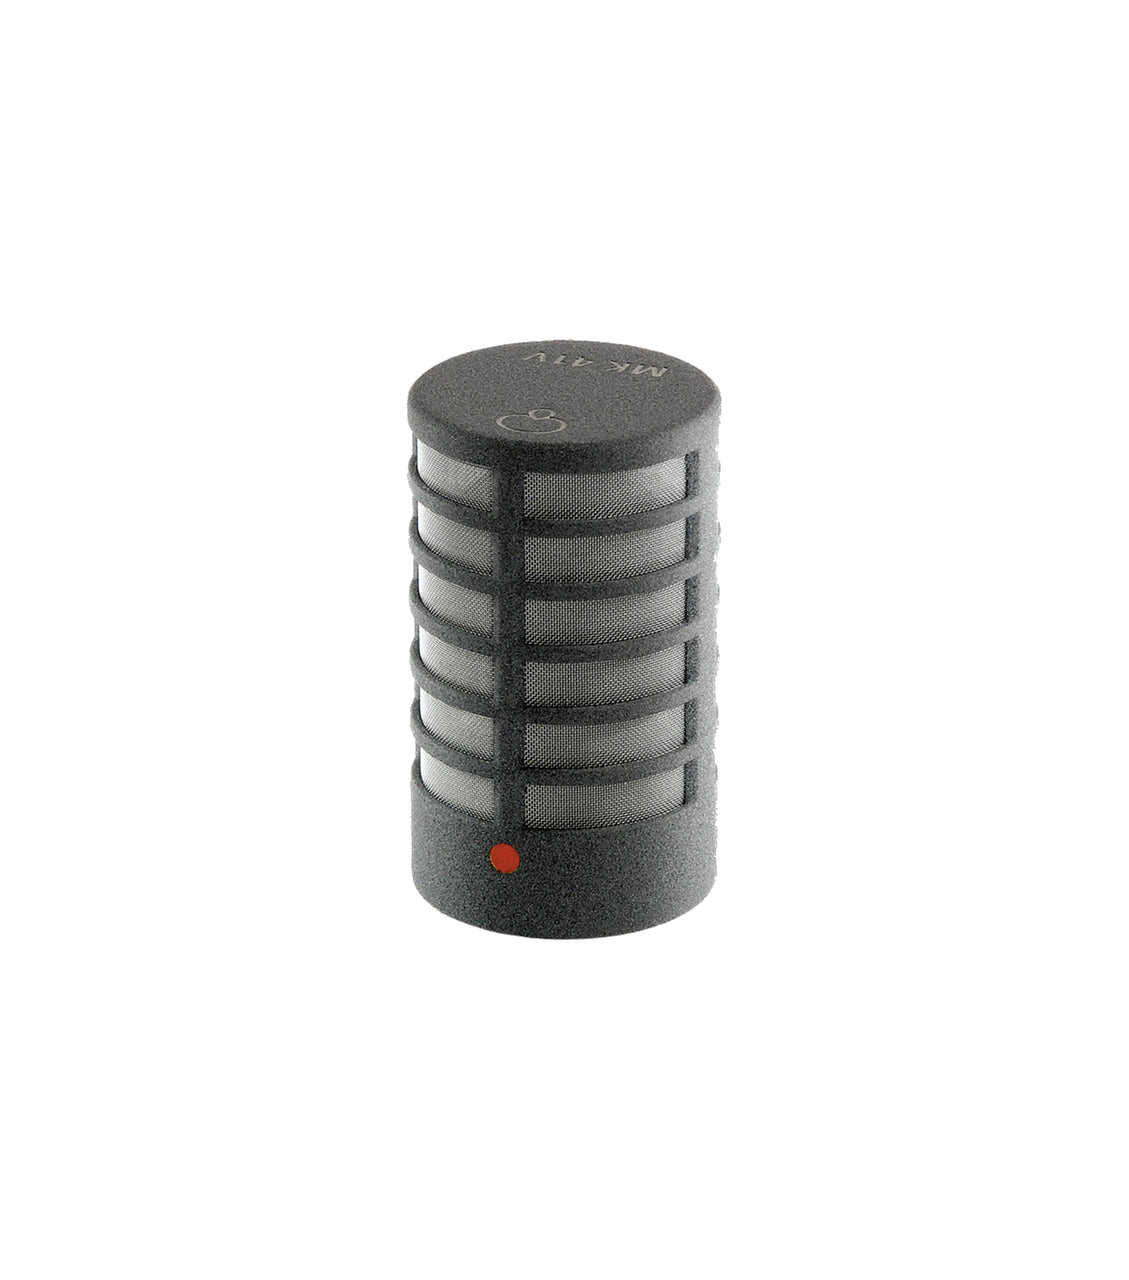 Schoeps MK 41VG Supercardioid Microphone Capsule with Lateral Pickup and Smooth Off Axis Response Matte Gray